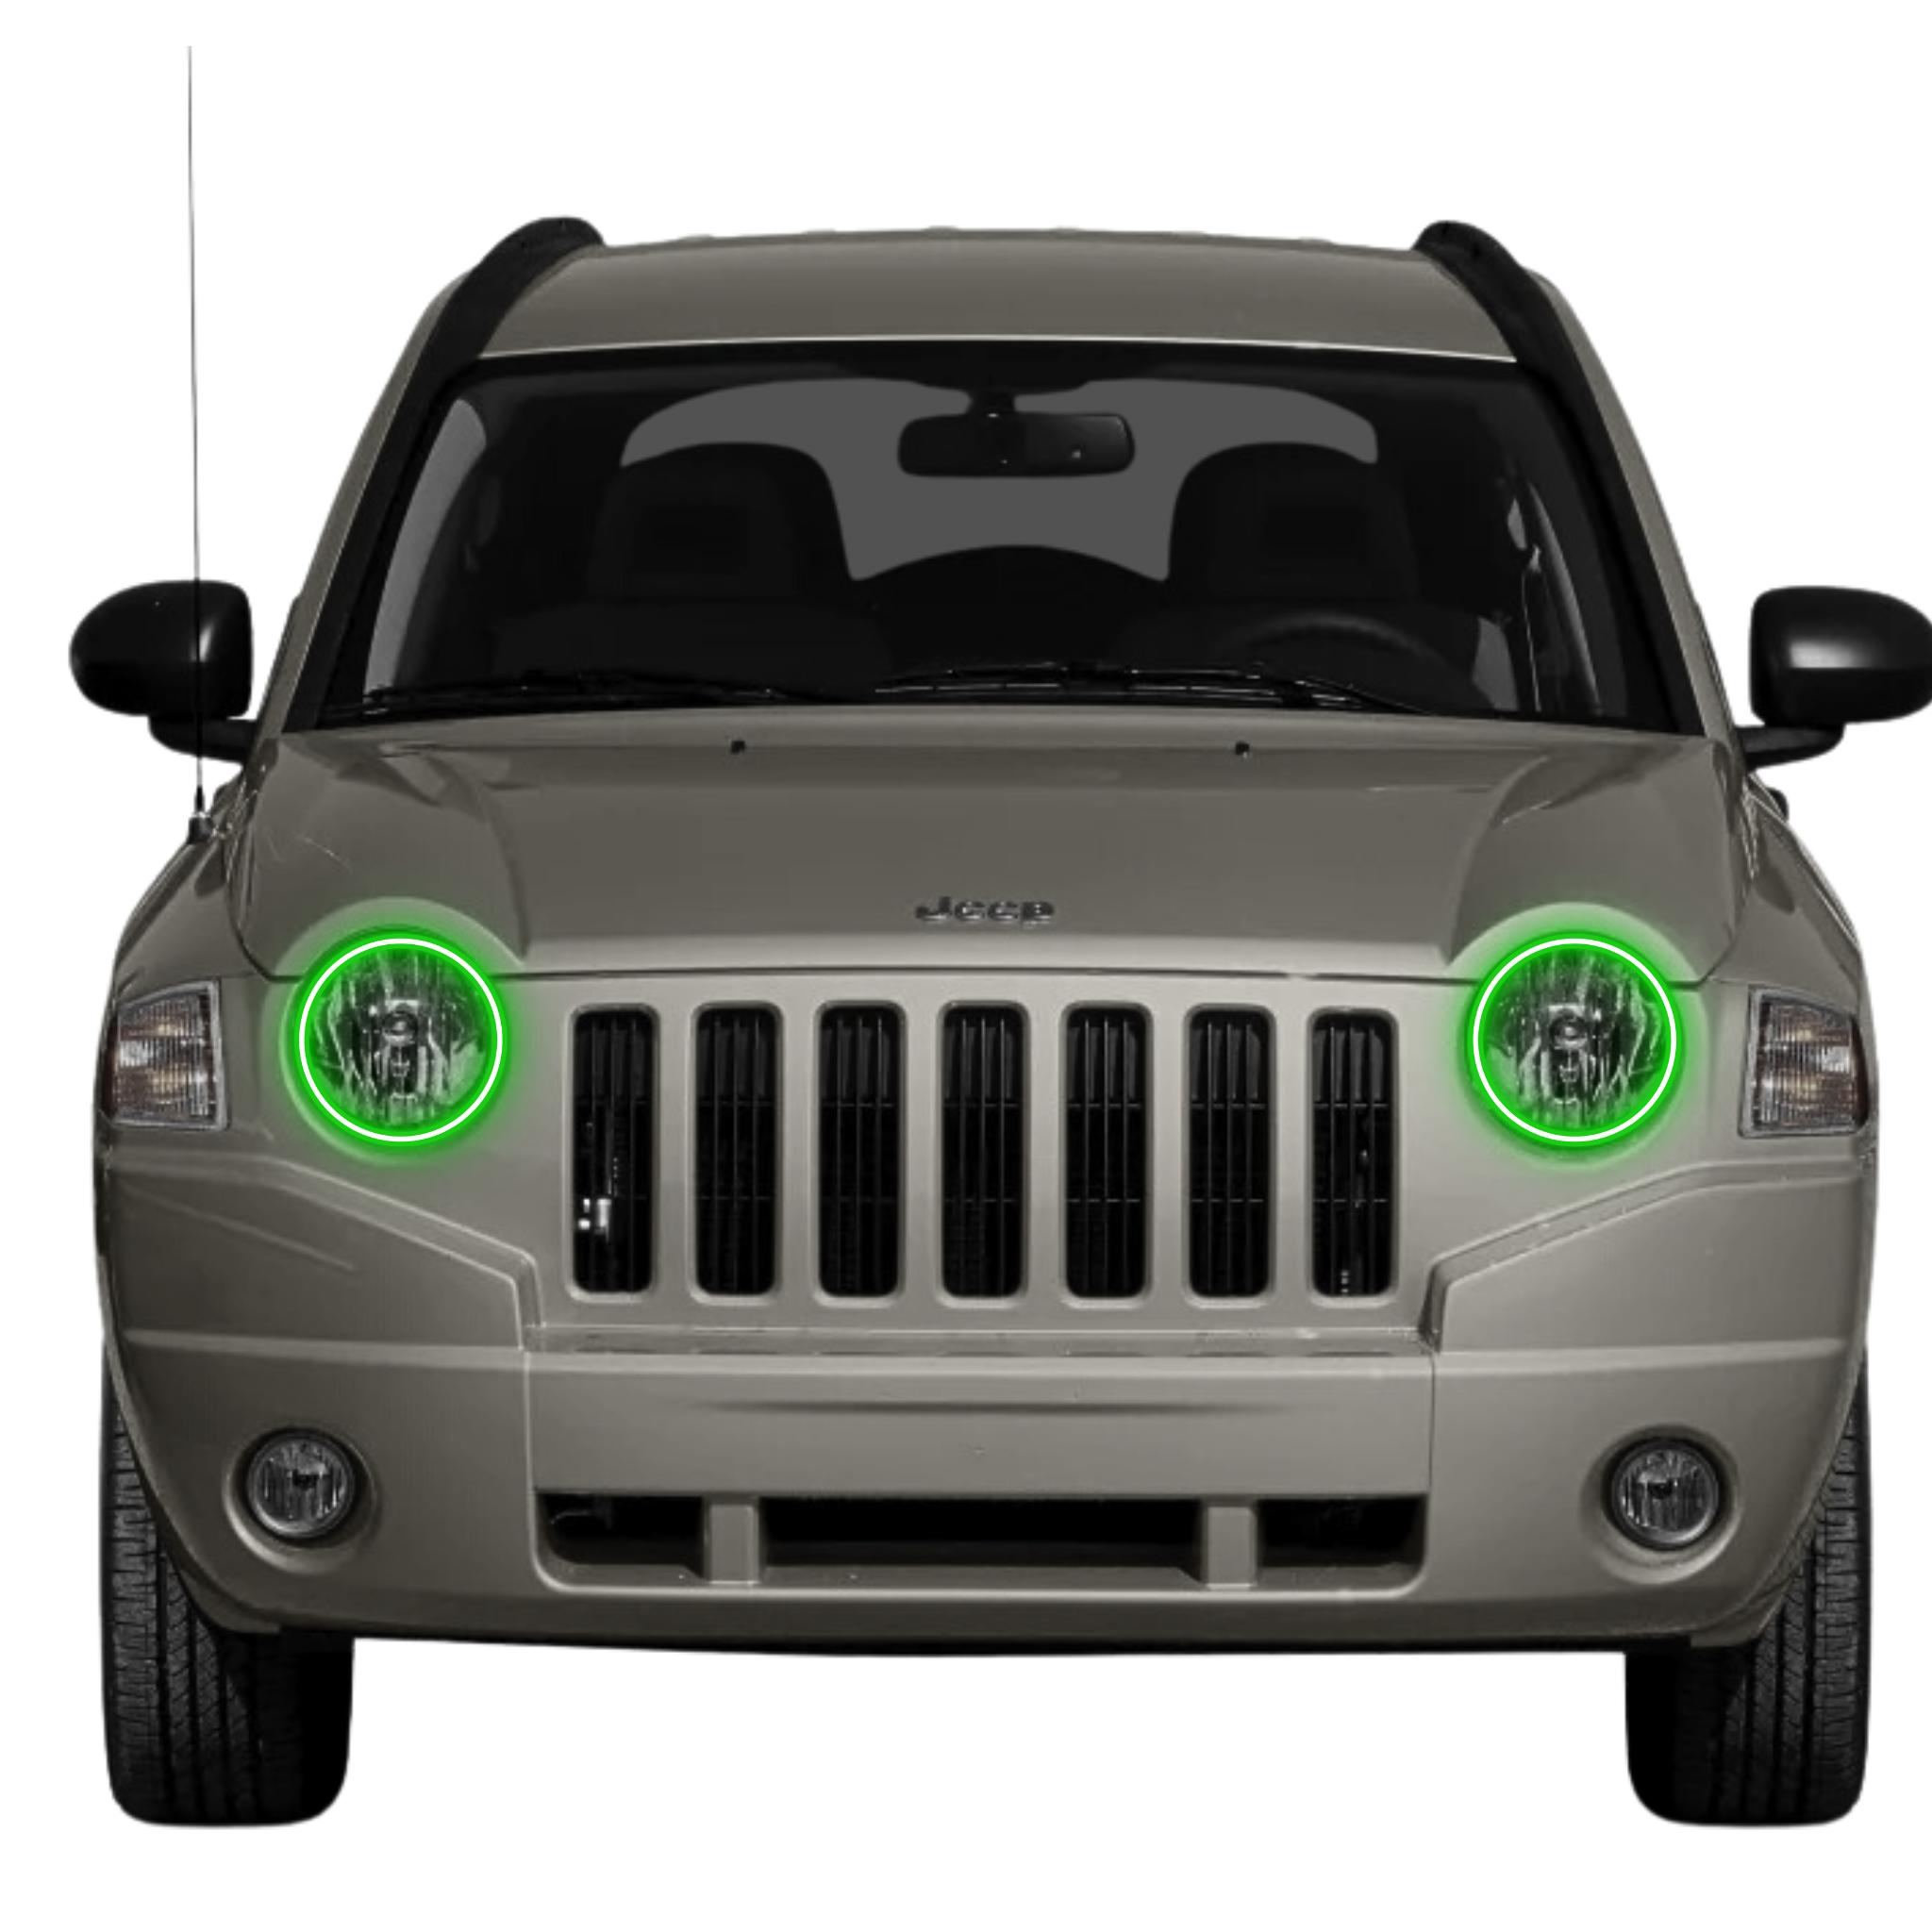 2007-2010 Jeep Compass Multicolor Halo Kit - RGB Halo Kits Multicolor Flow Series Color Chasing RGBWA LED headlight kit Colorshift Oracle Lighting Trendz OneUpLighting Morimoto theretrofitsource AutoLEDTech Diode Dynamics